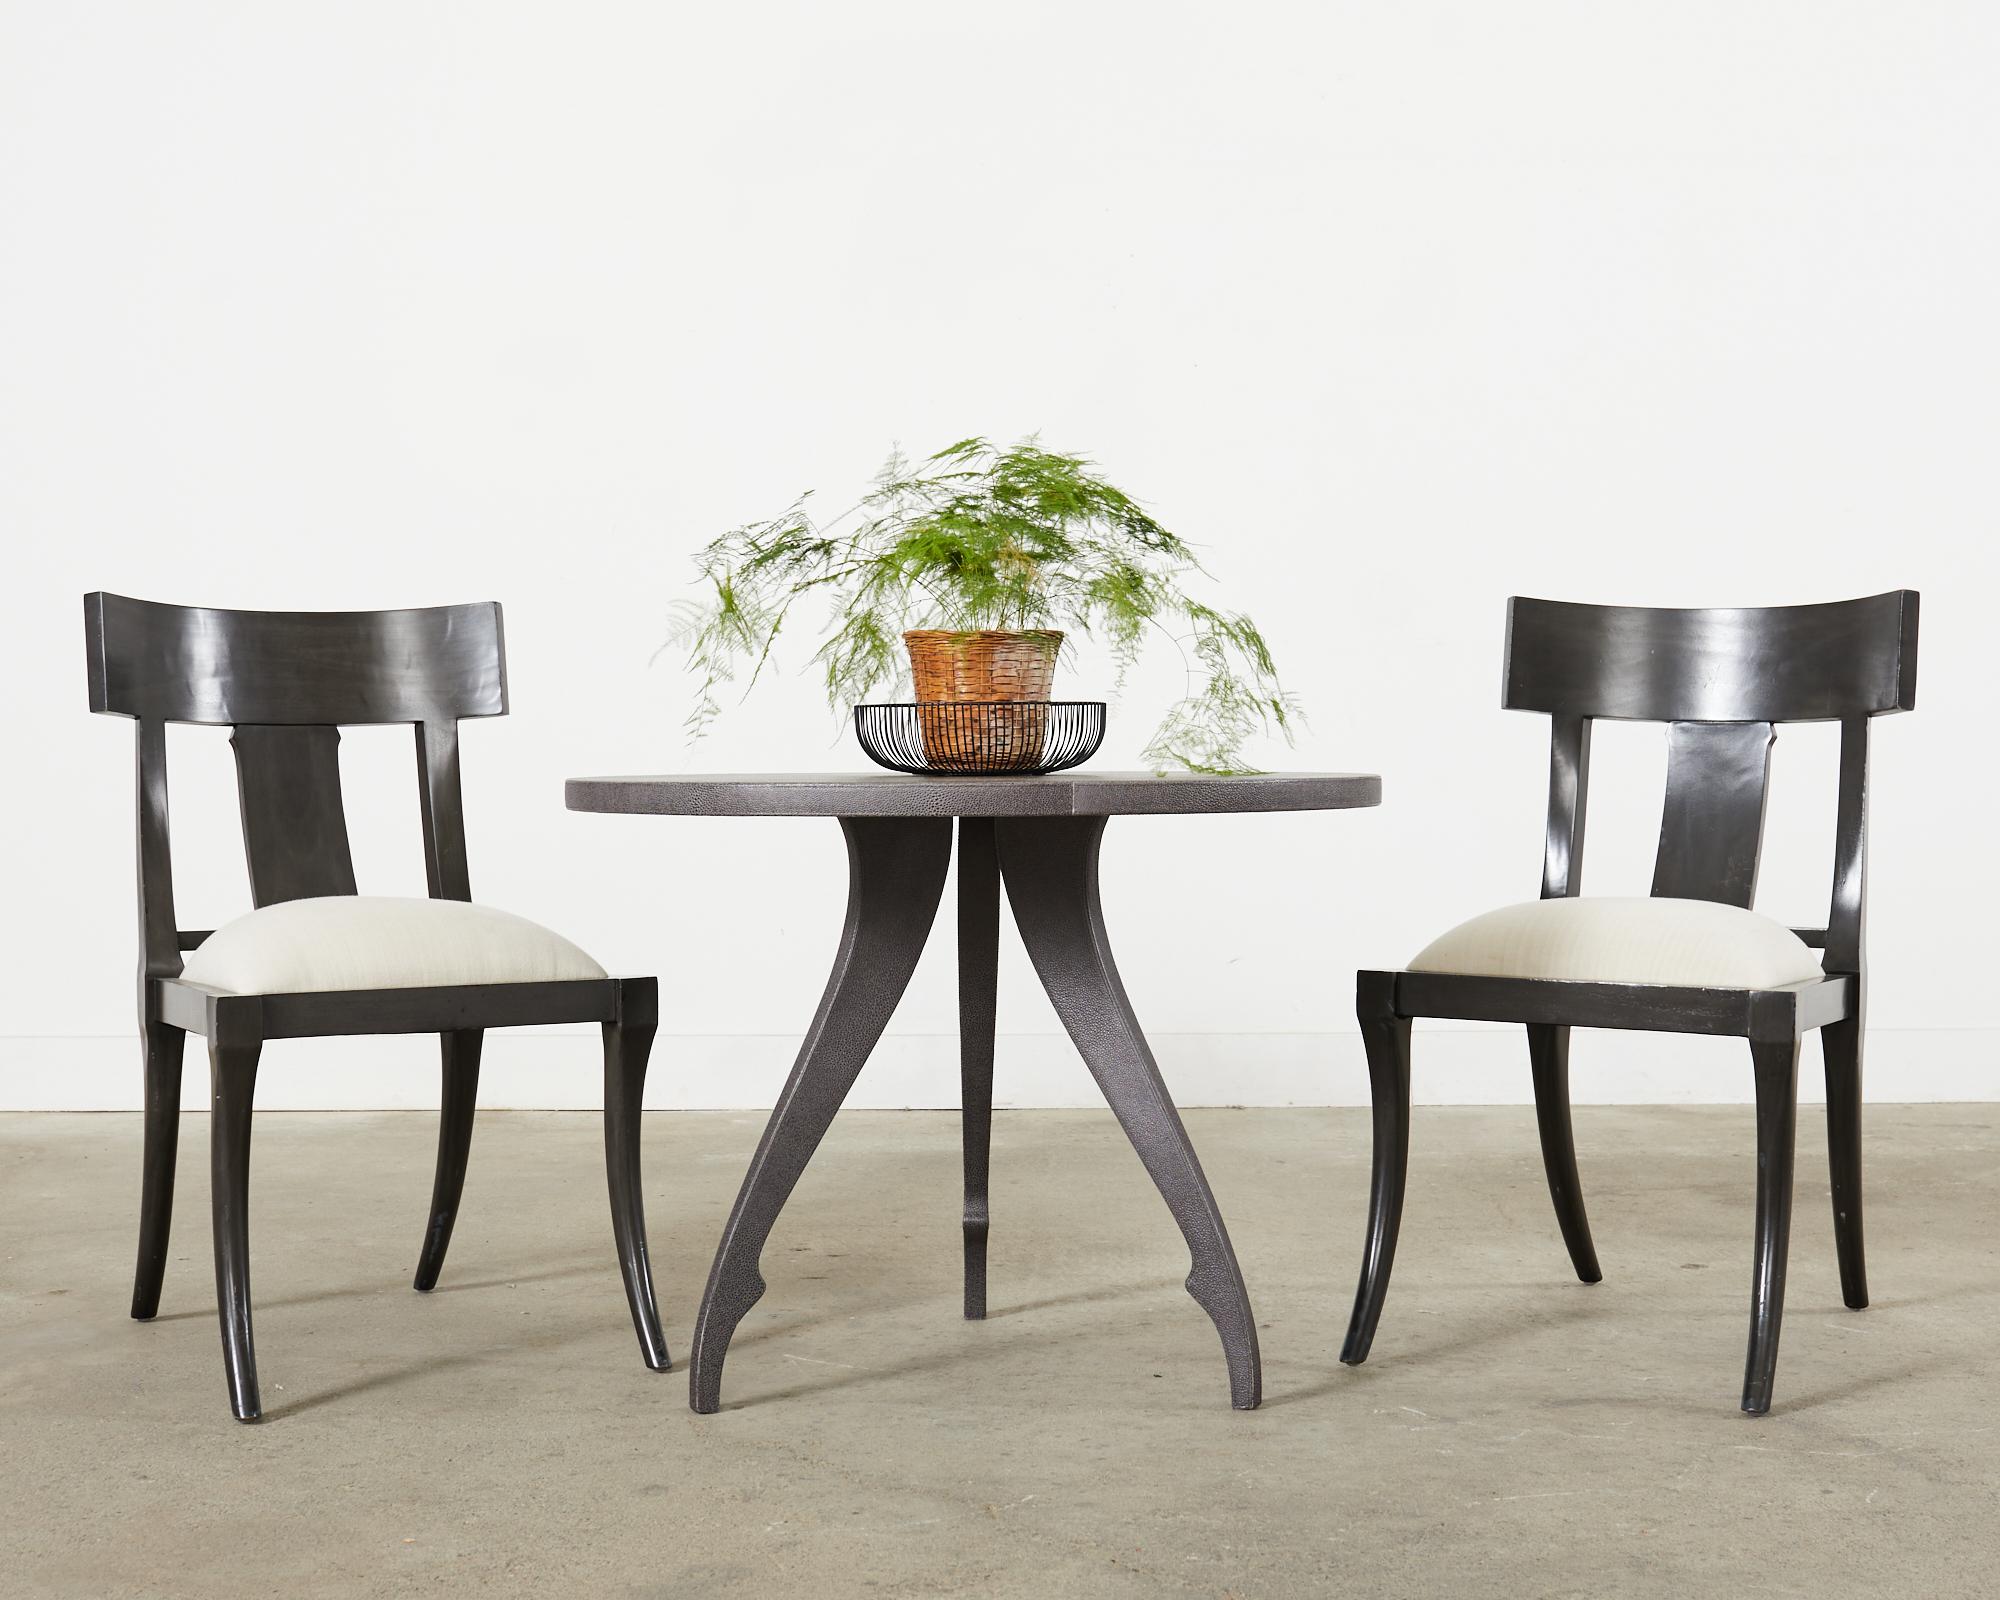 Whimsical and rare round center table designed by Fendi Casa. The table features a round top supported by a tripod base with ballet legs and feet. The swan table is fully upholstered with hand-stitched faux shagreen dark grey leather. Beautifully